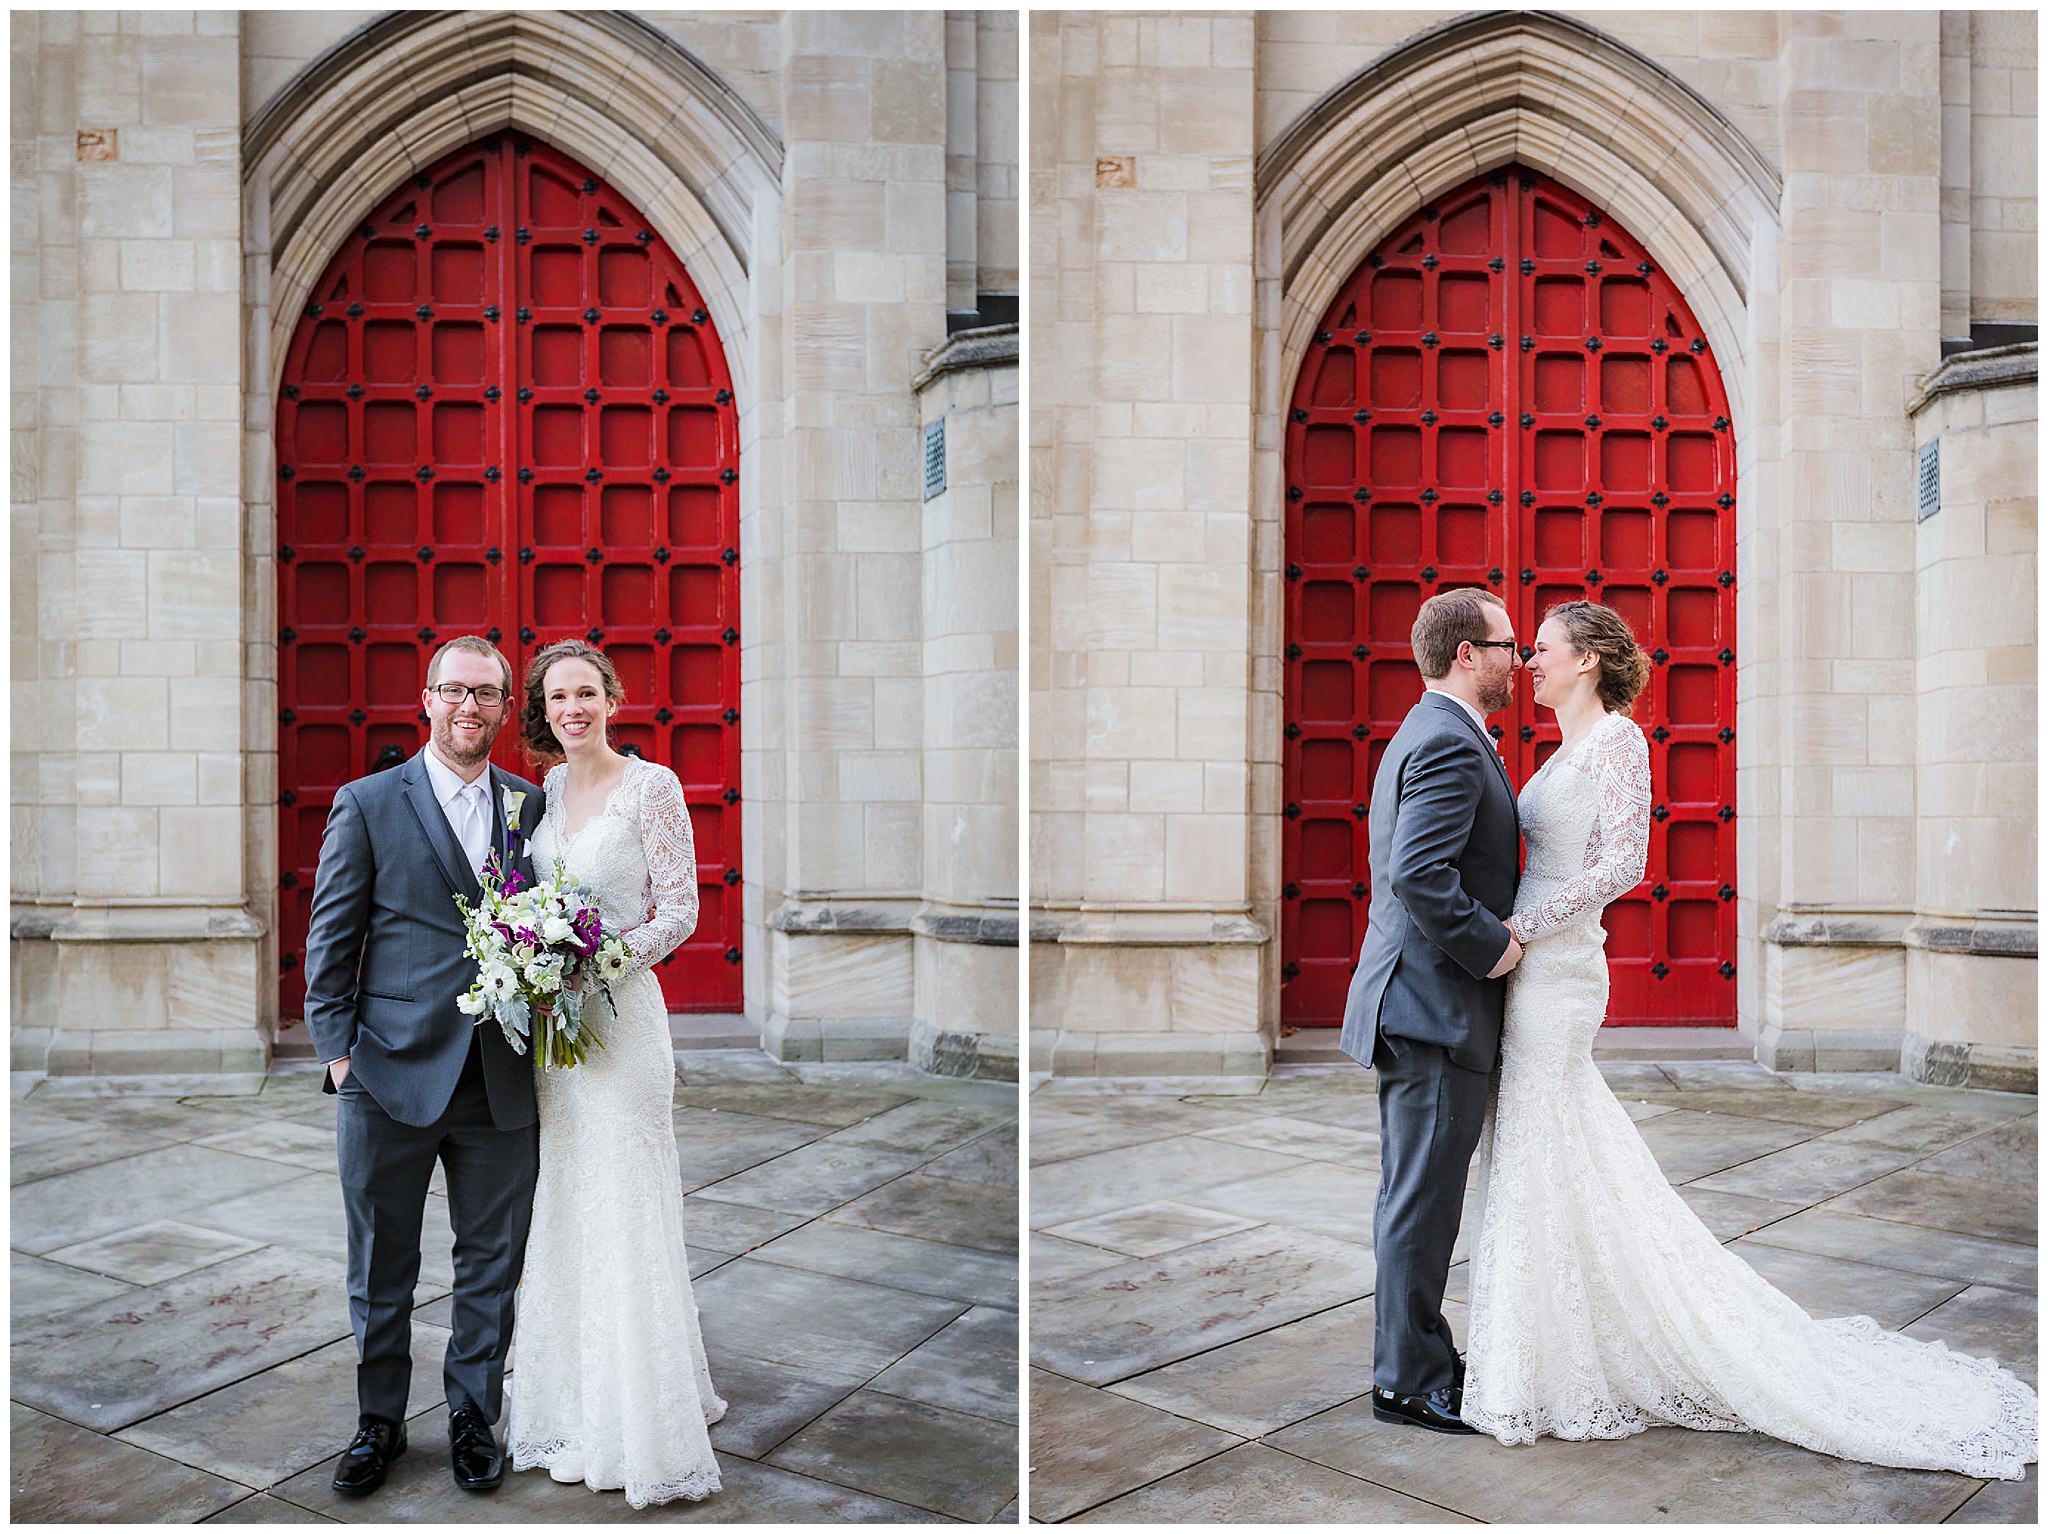 Newlyweds in front of the iconic red door at the Cathedral of Learning after a Heinz Chapel wedding